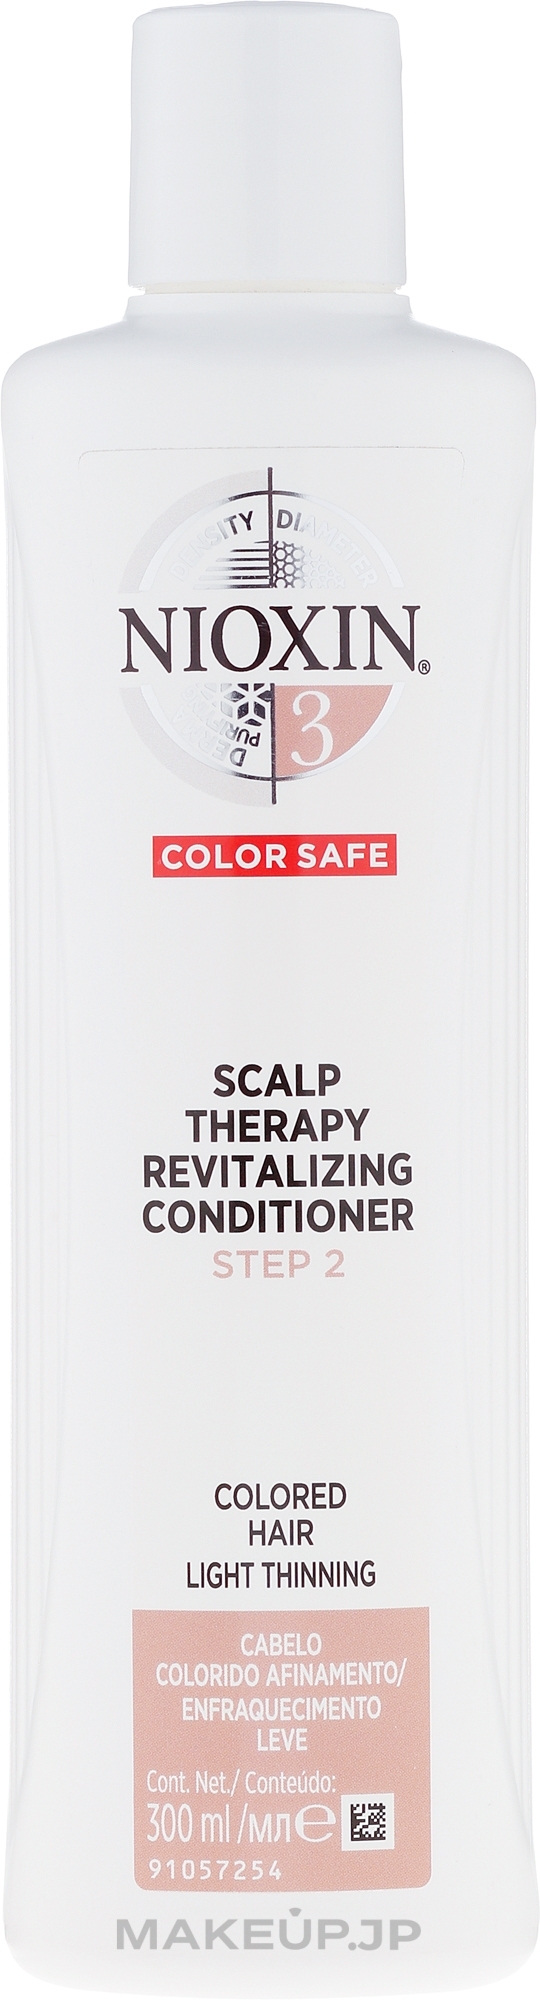 Repair Conditioner - Nioxin Thinning Hair System 3 Color Safe Scalp Revitalizing Conditioner — photo 300 ml